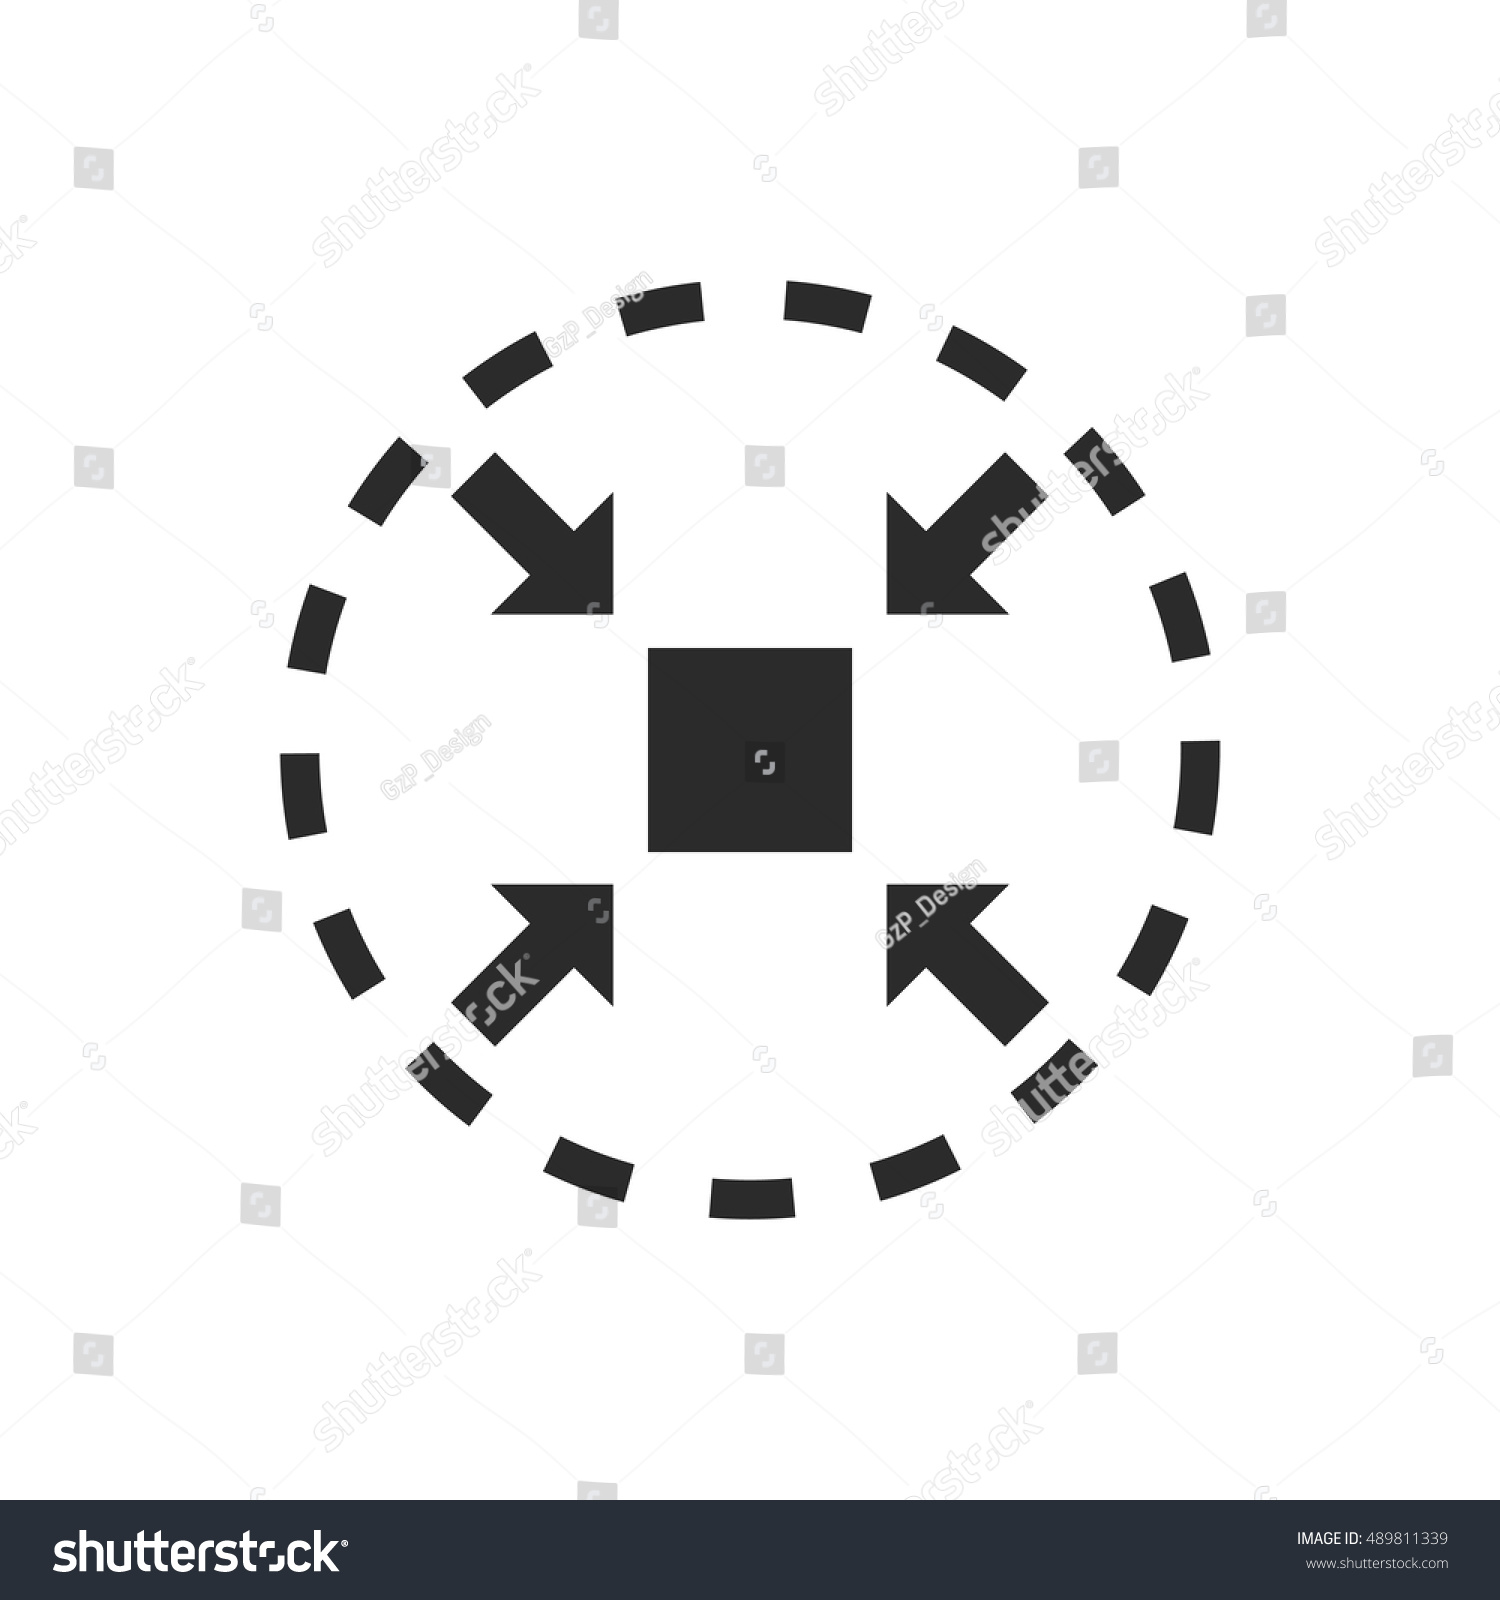 Download Compact Size Icon Vector Illustration Stock Vector ...